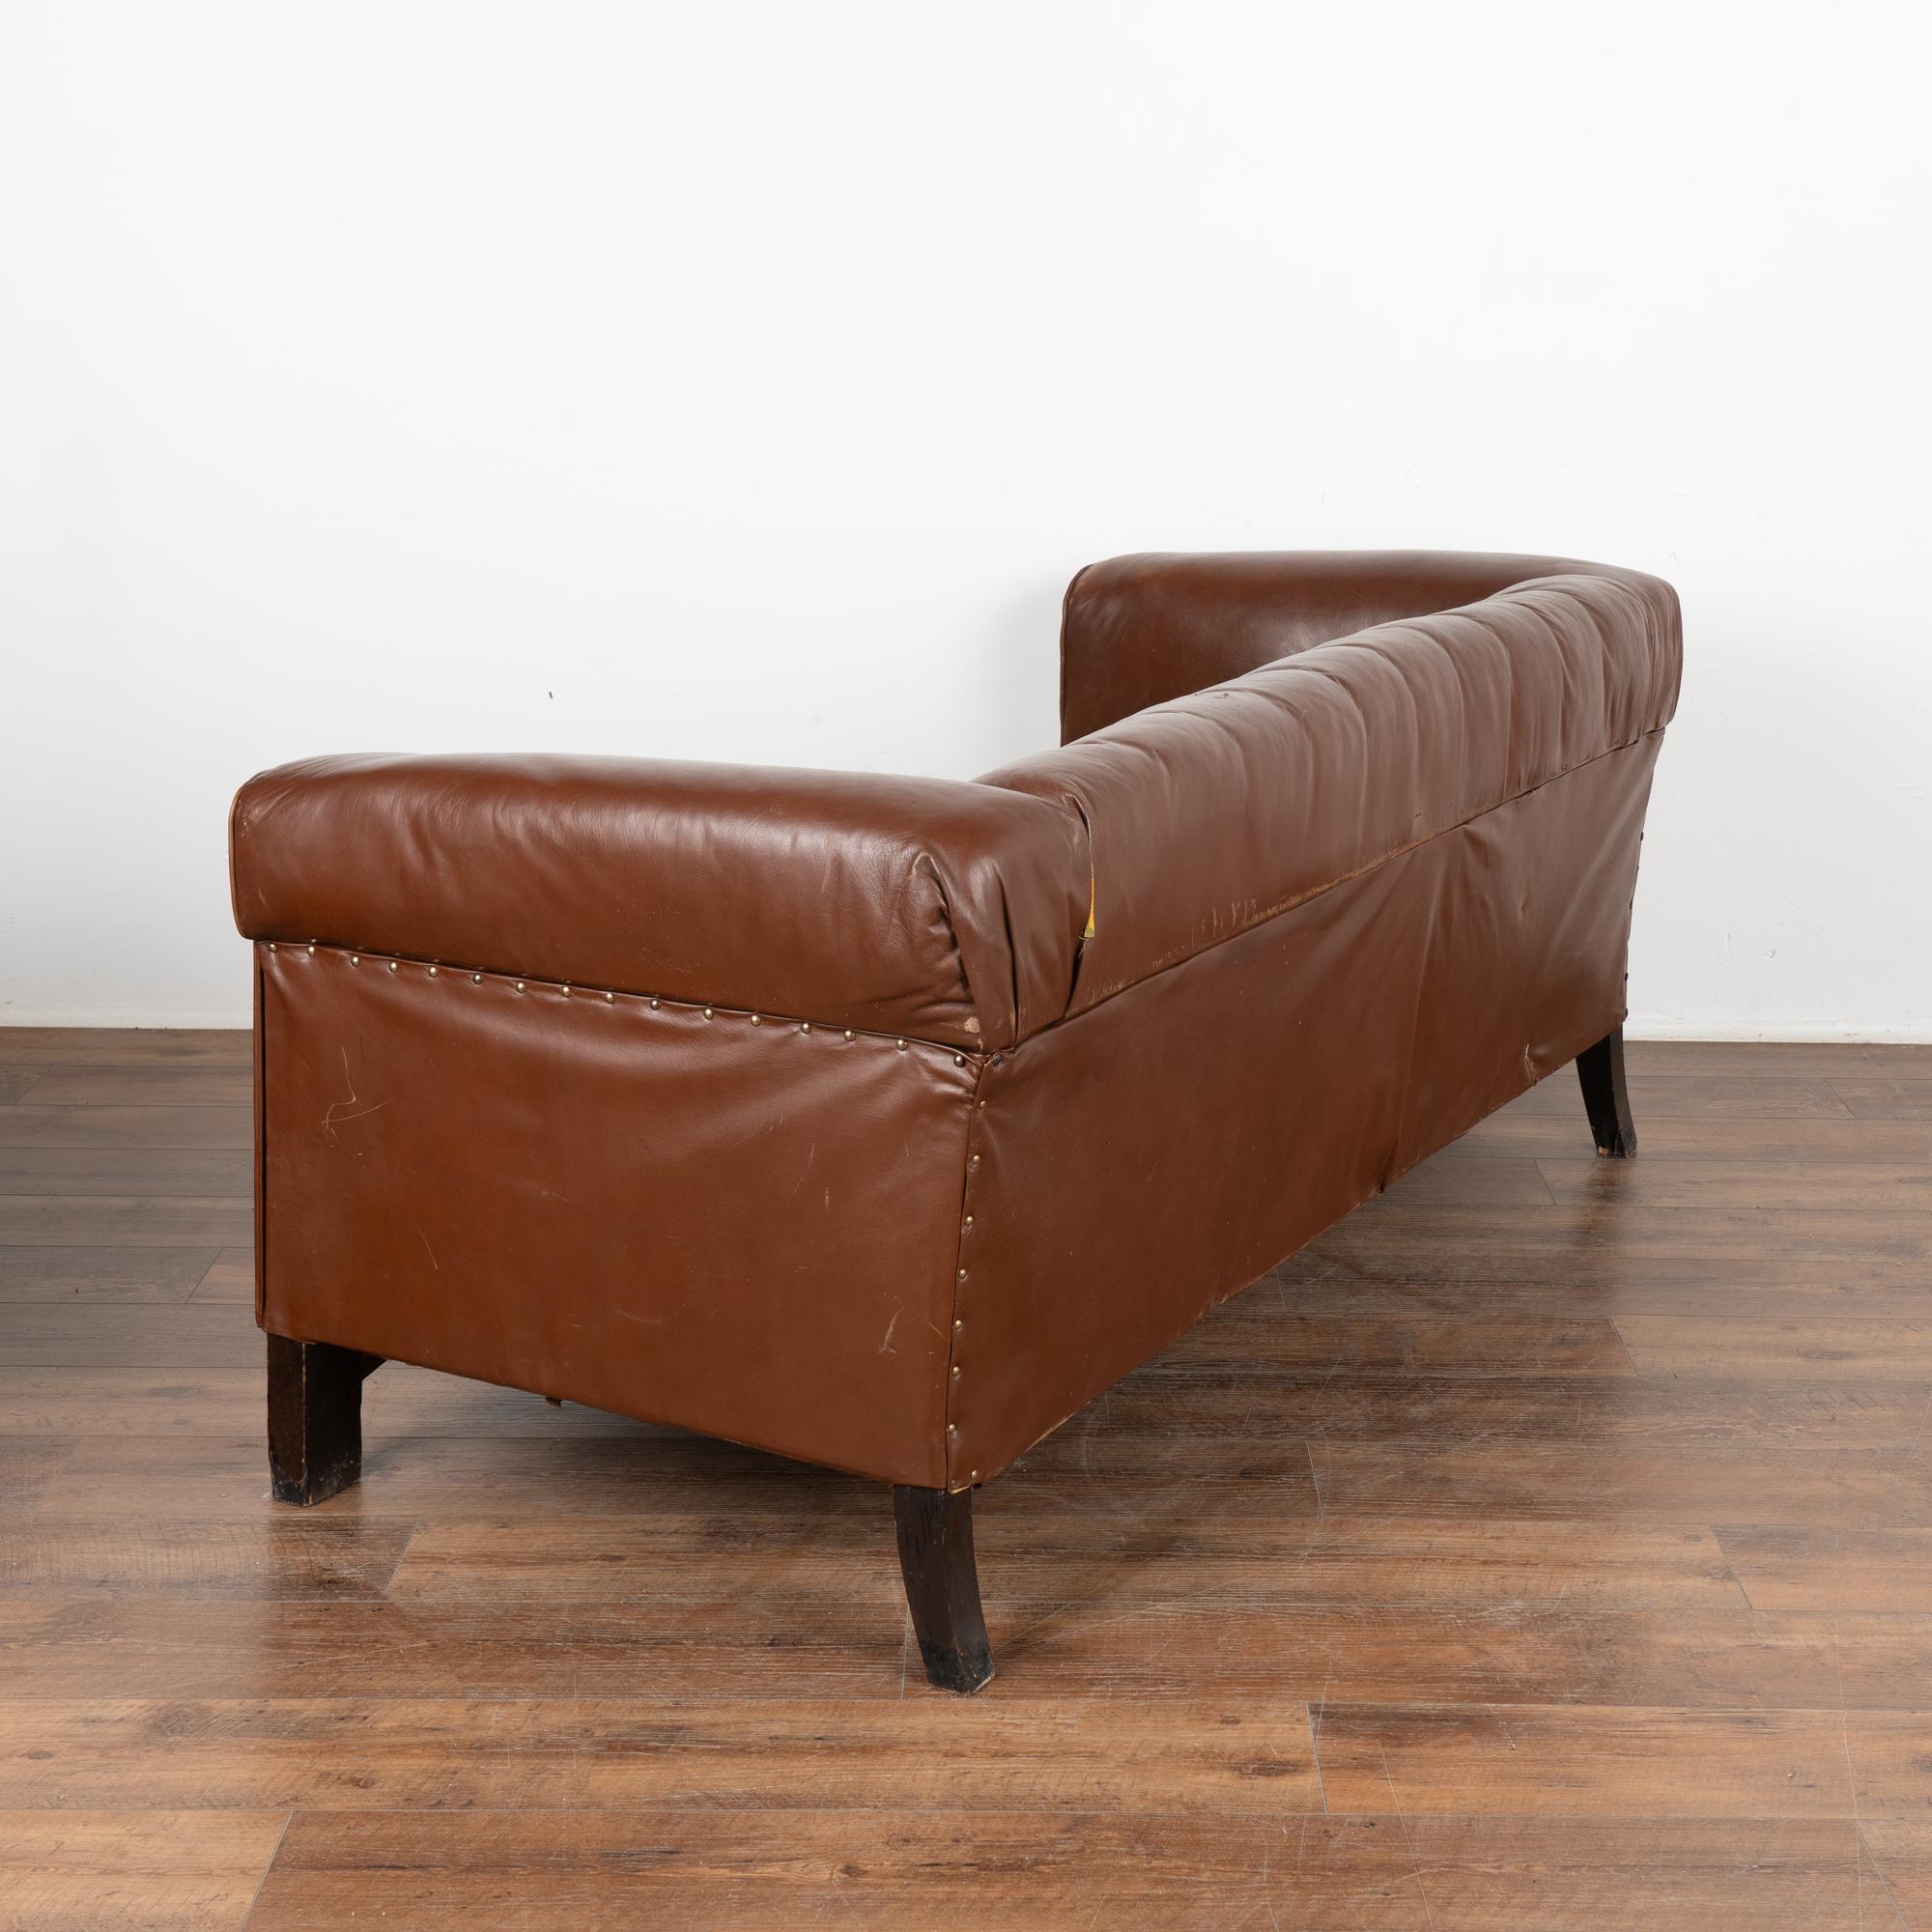 Set of 3, Vintage Brown Leather Sofa and Pair of Club Chairs, Denmark circa 1960 For Sale 6